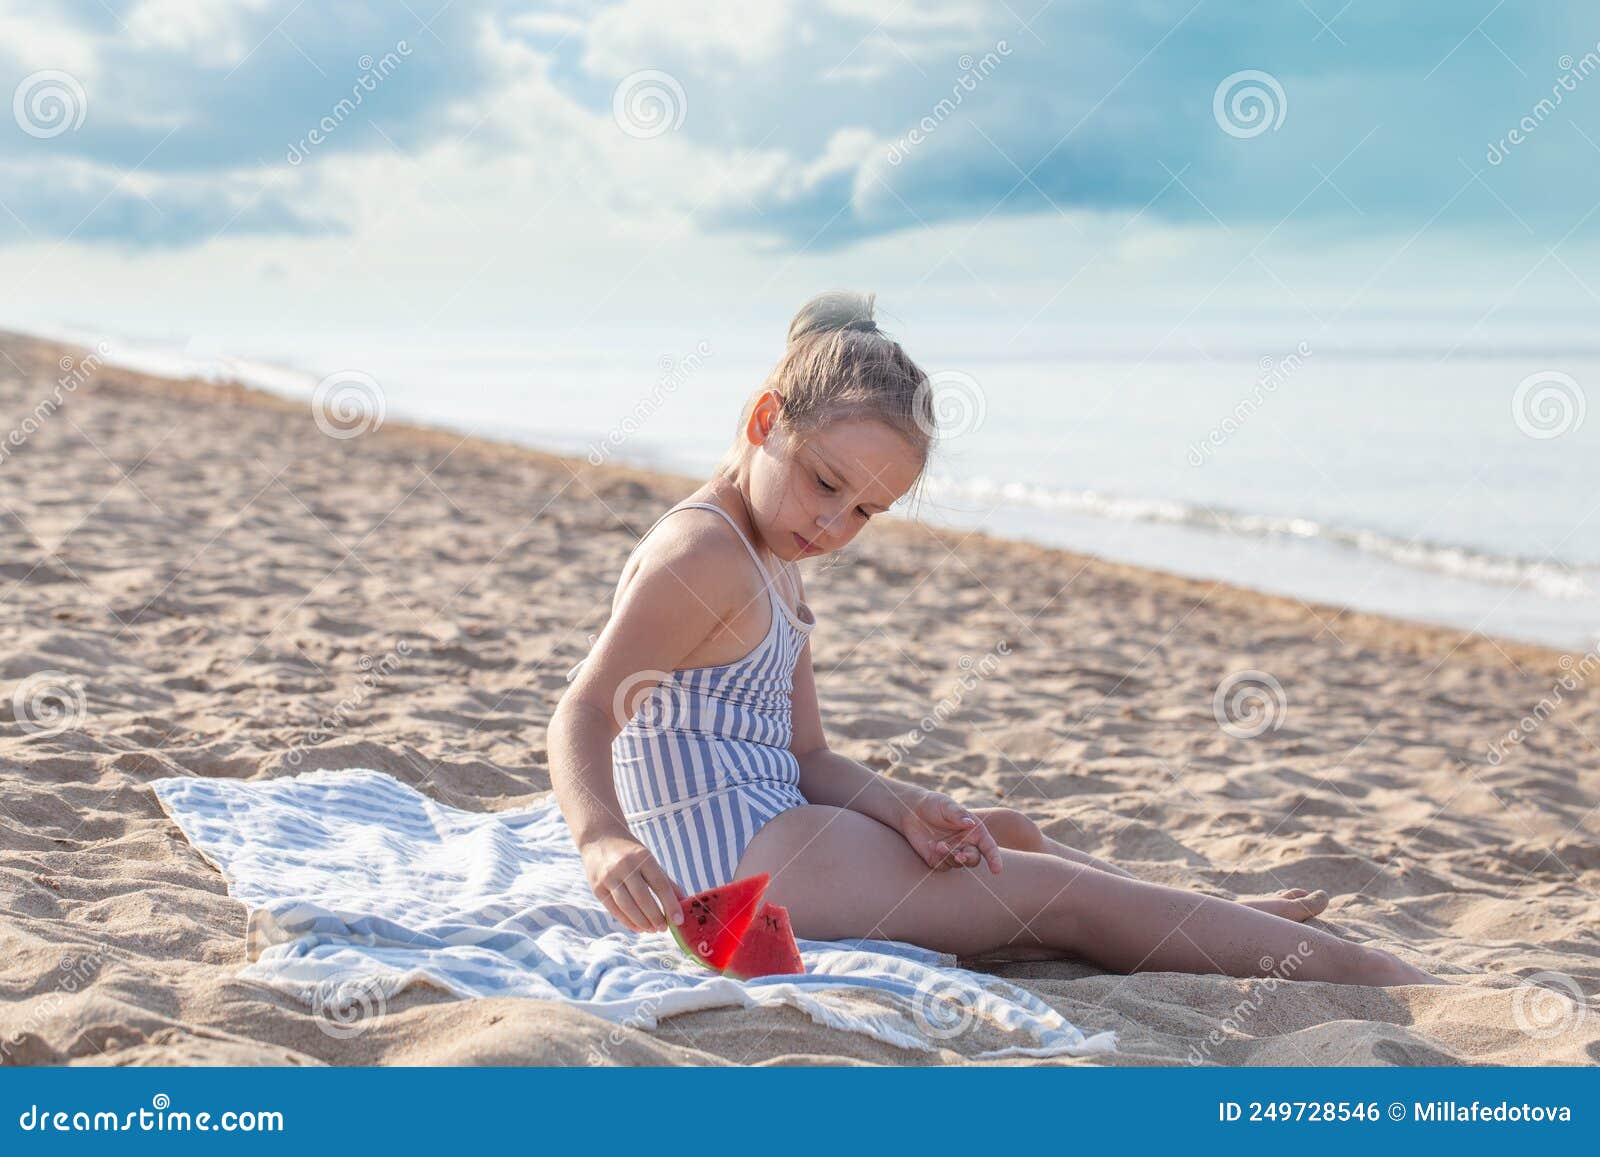 smilling little girl eating watermelon. summer, hollidays and travel concept